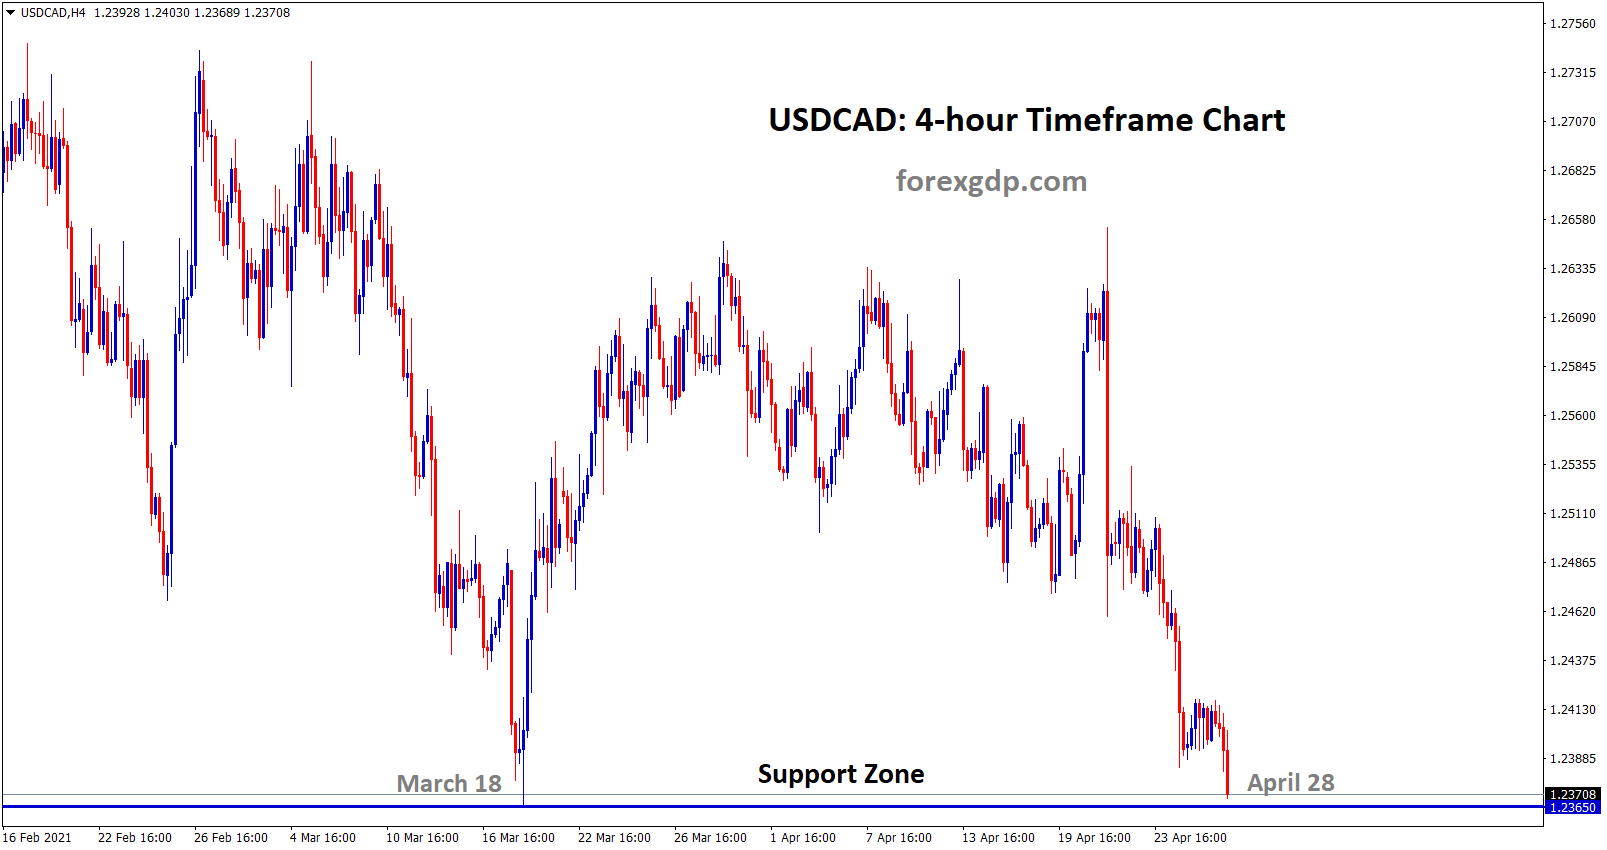 USDCAD at the key support level